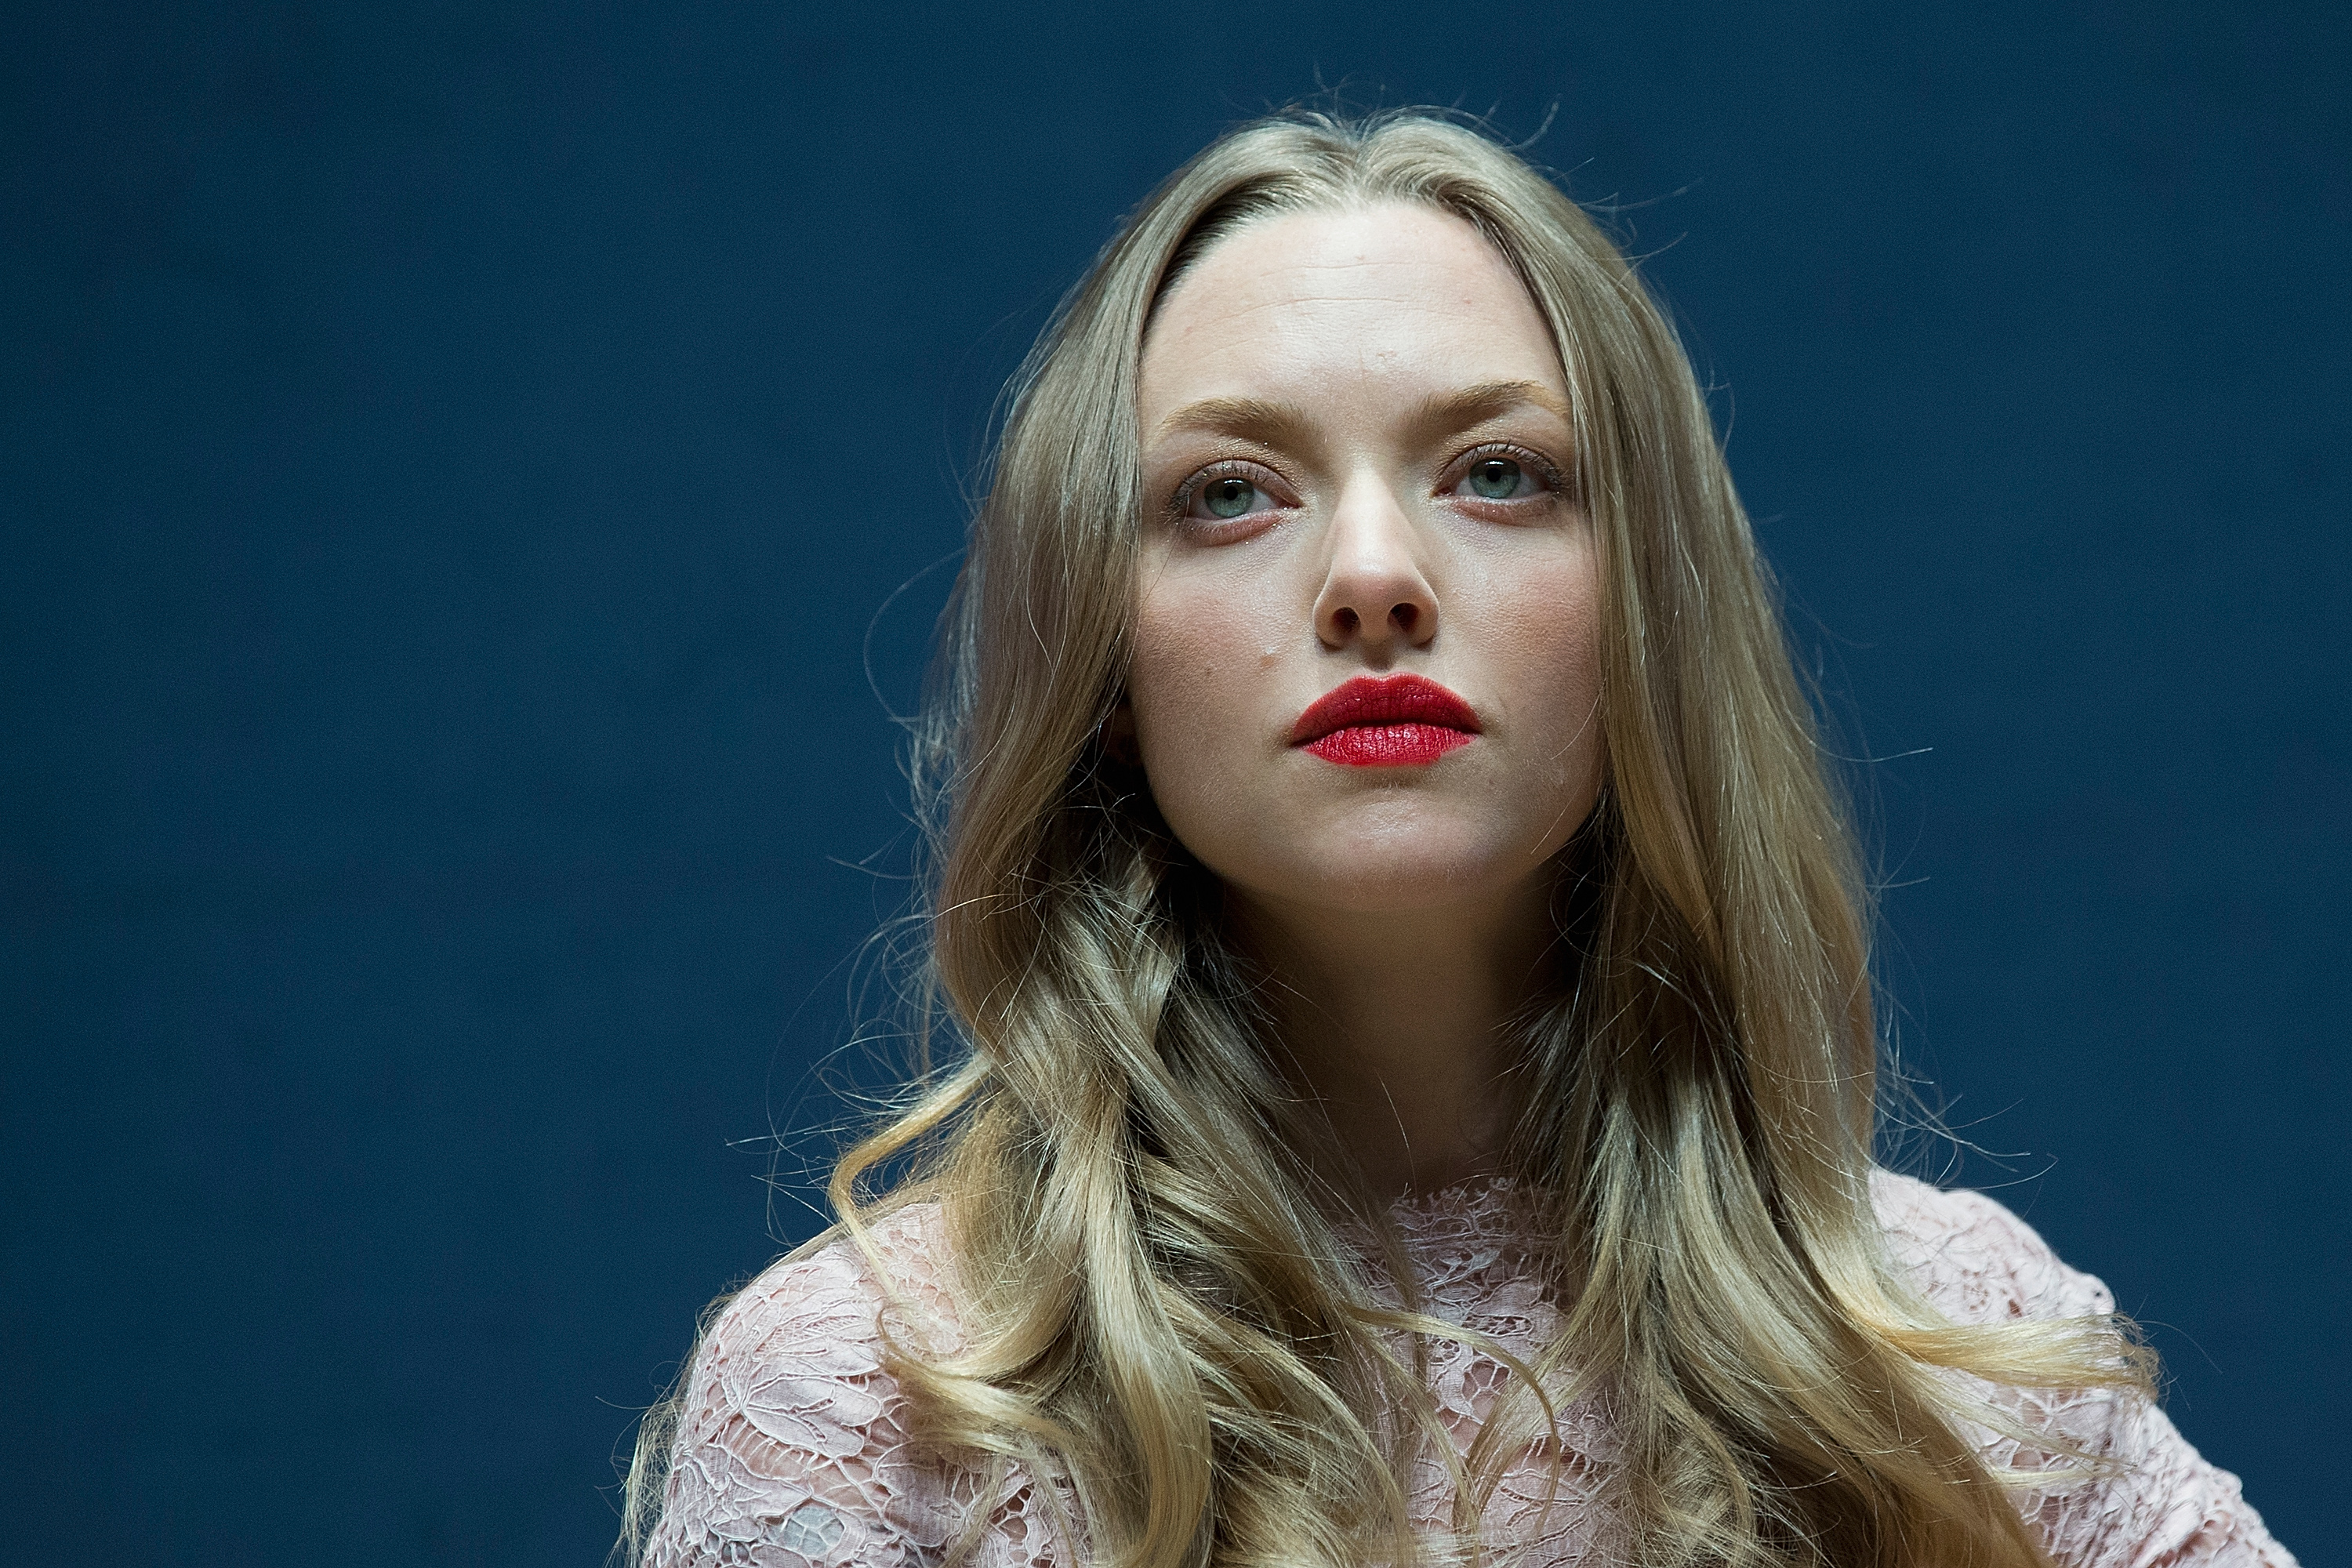 Amanda Seyfried attends the press conference at RAUM on December 4, 2013 in Seoul, South Korea. (Han Myung-Gu— WireImage)